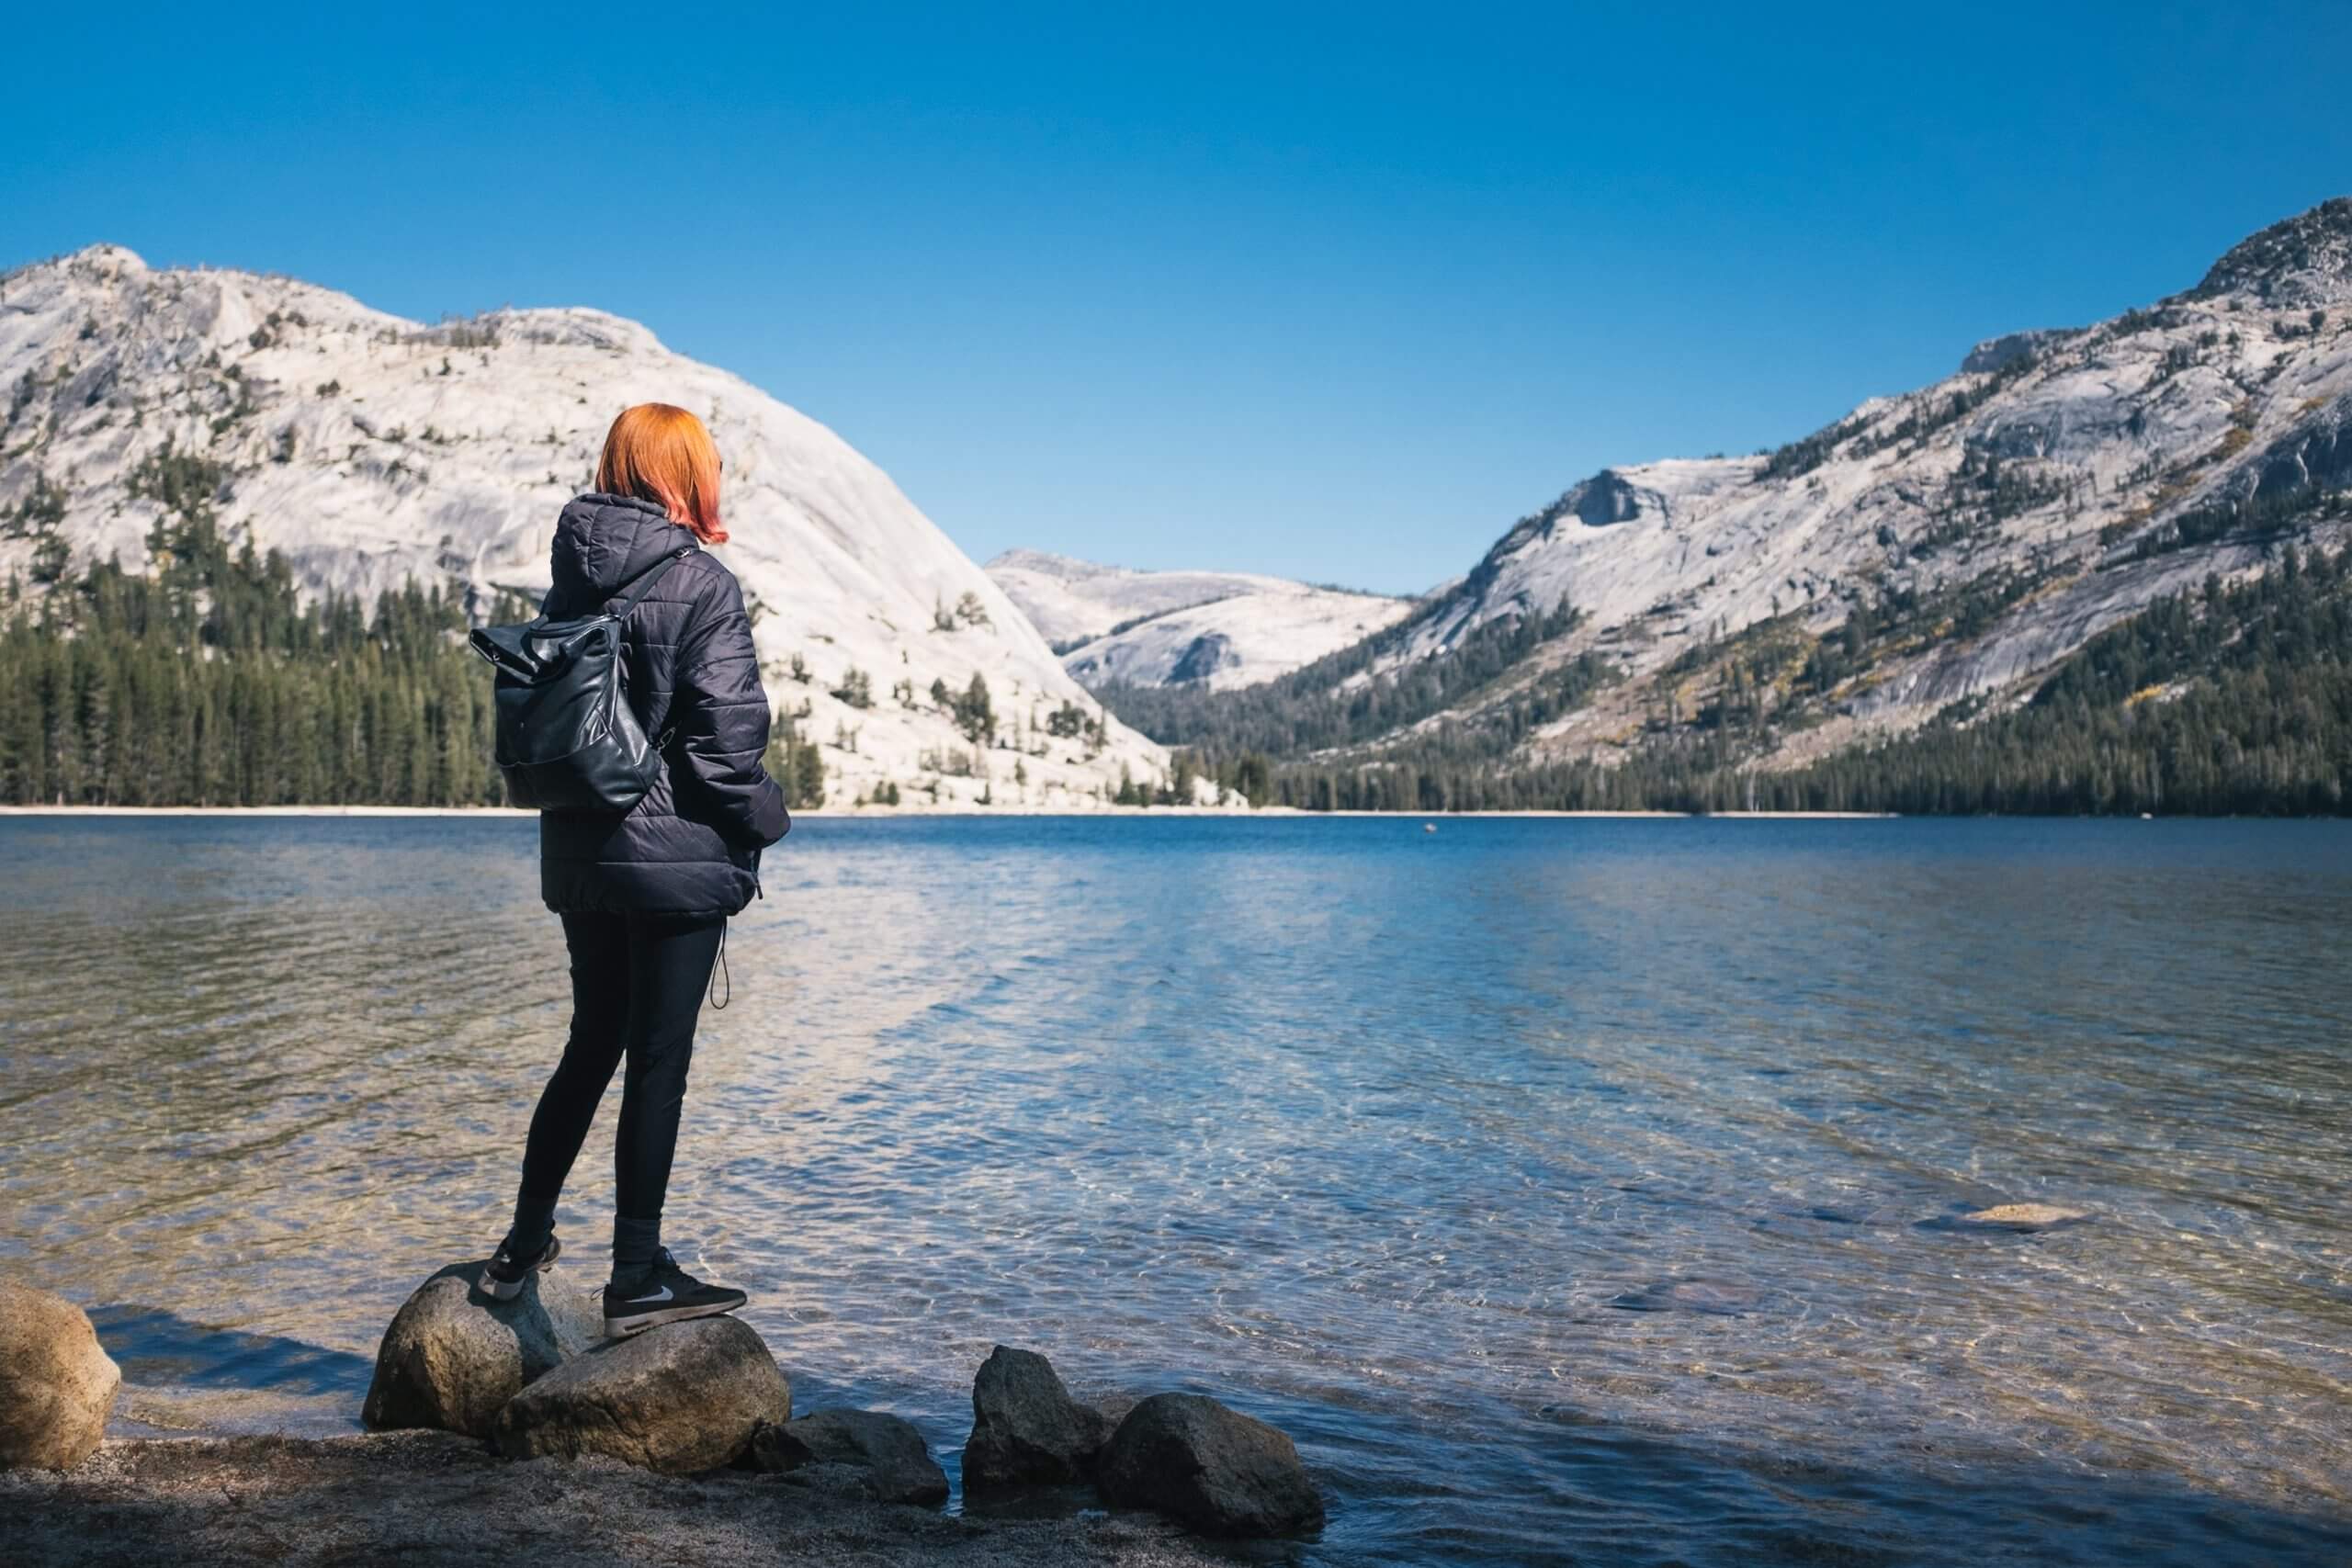 Red haired person wearing coat and carrying backpack surveys a lake and distant snow-covered mountain